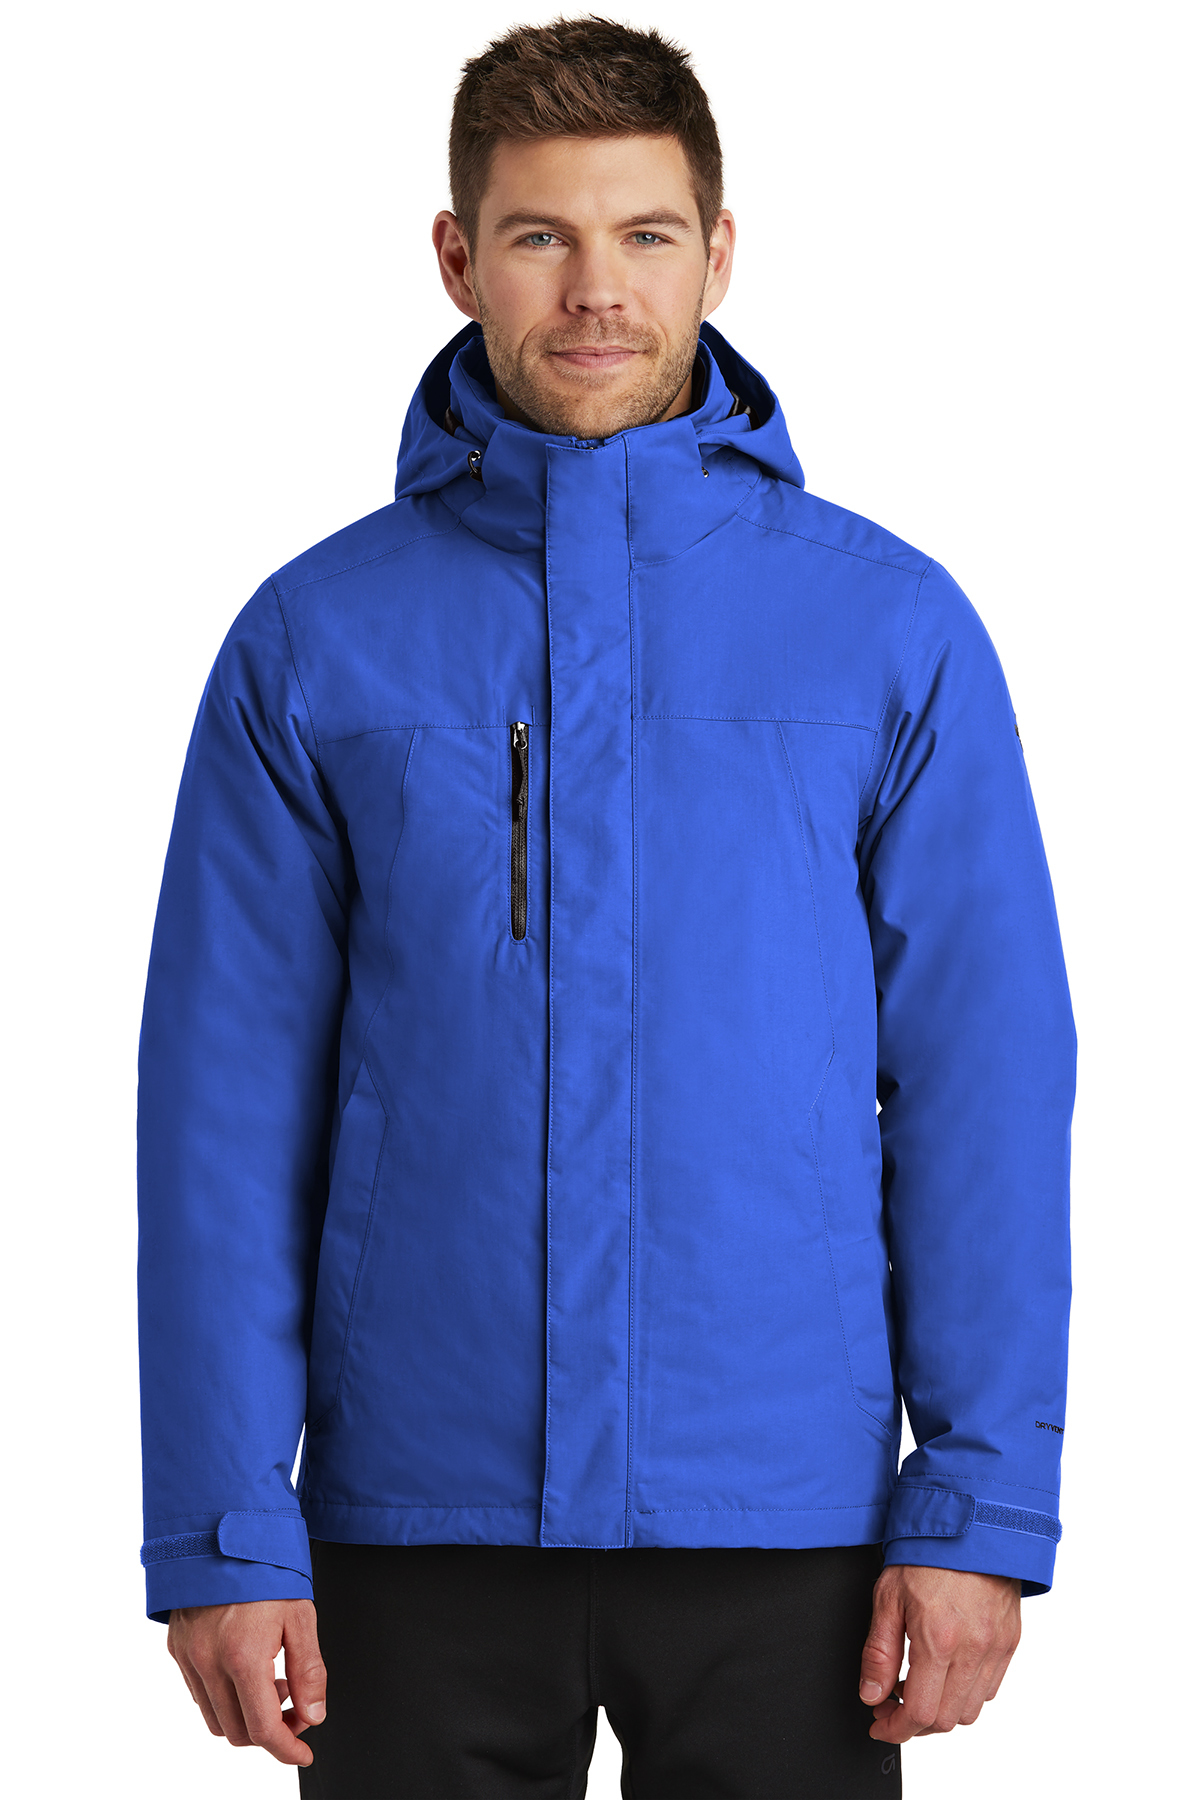 north face 3 in 1 mens